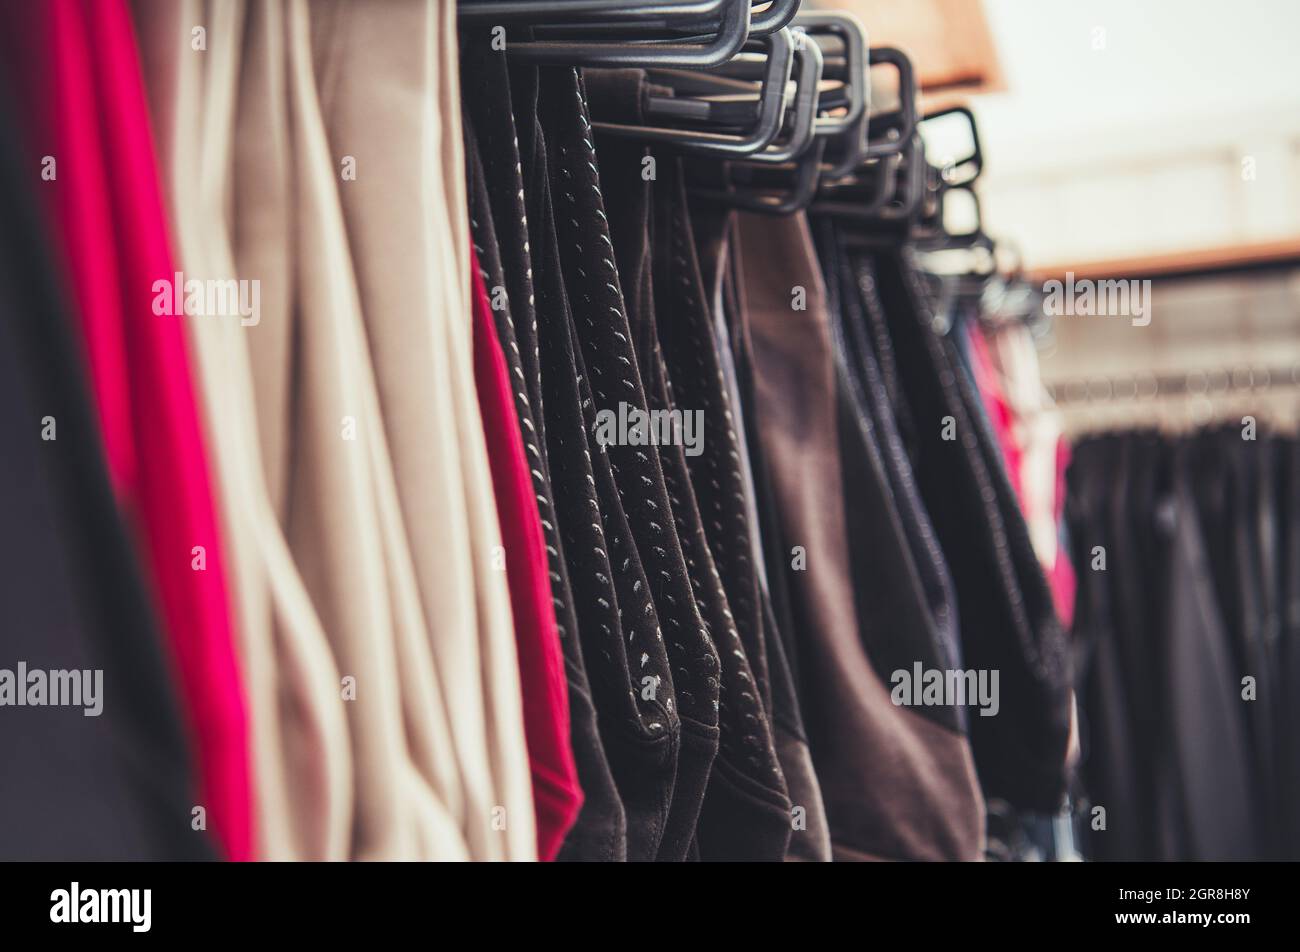 Selection Of Woman Clothes Hanging On A Store Rack. Retail Business Theme. Stock Photo